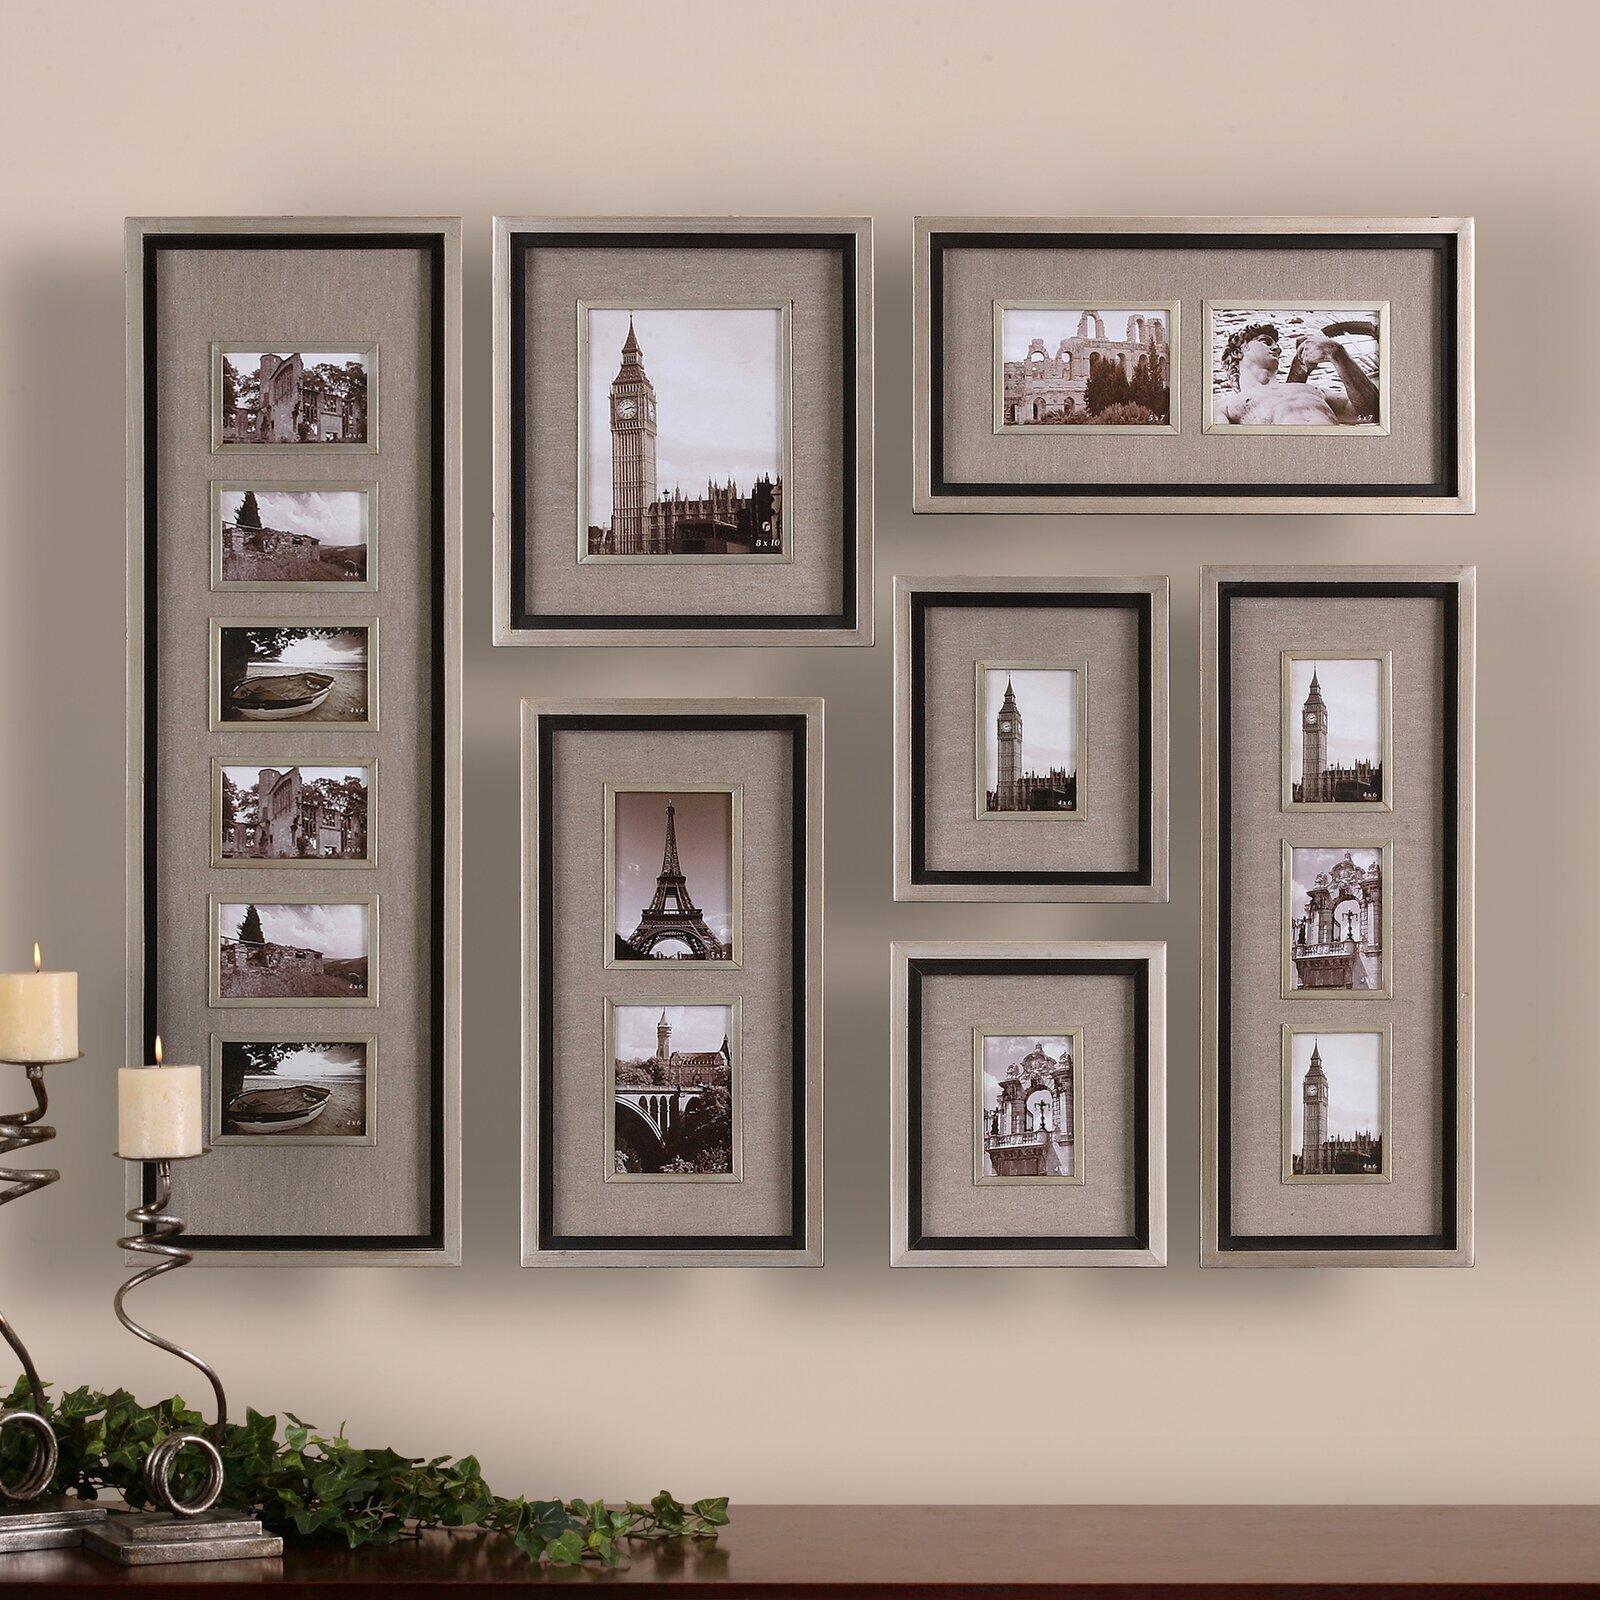 26 PCS White Wood Multi Picture Collage Set Photo Frames Home Decor Wall Mounted 